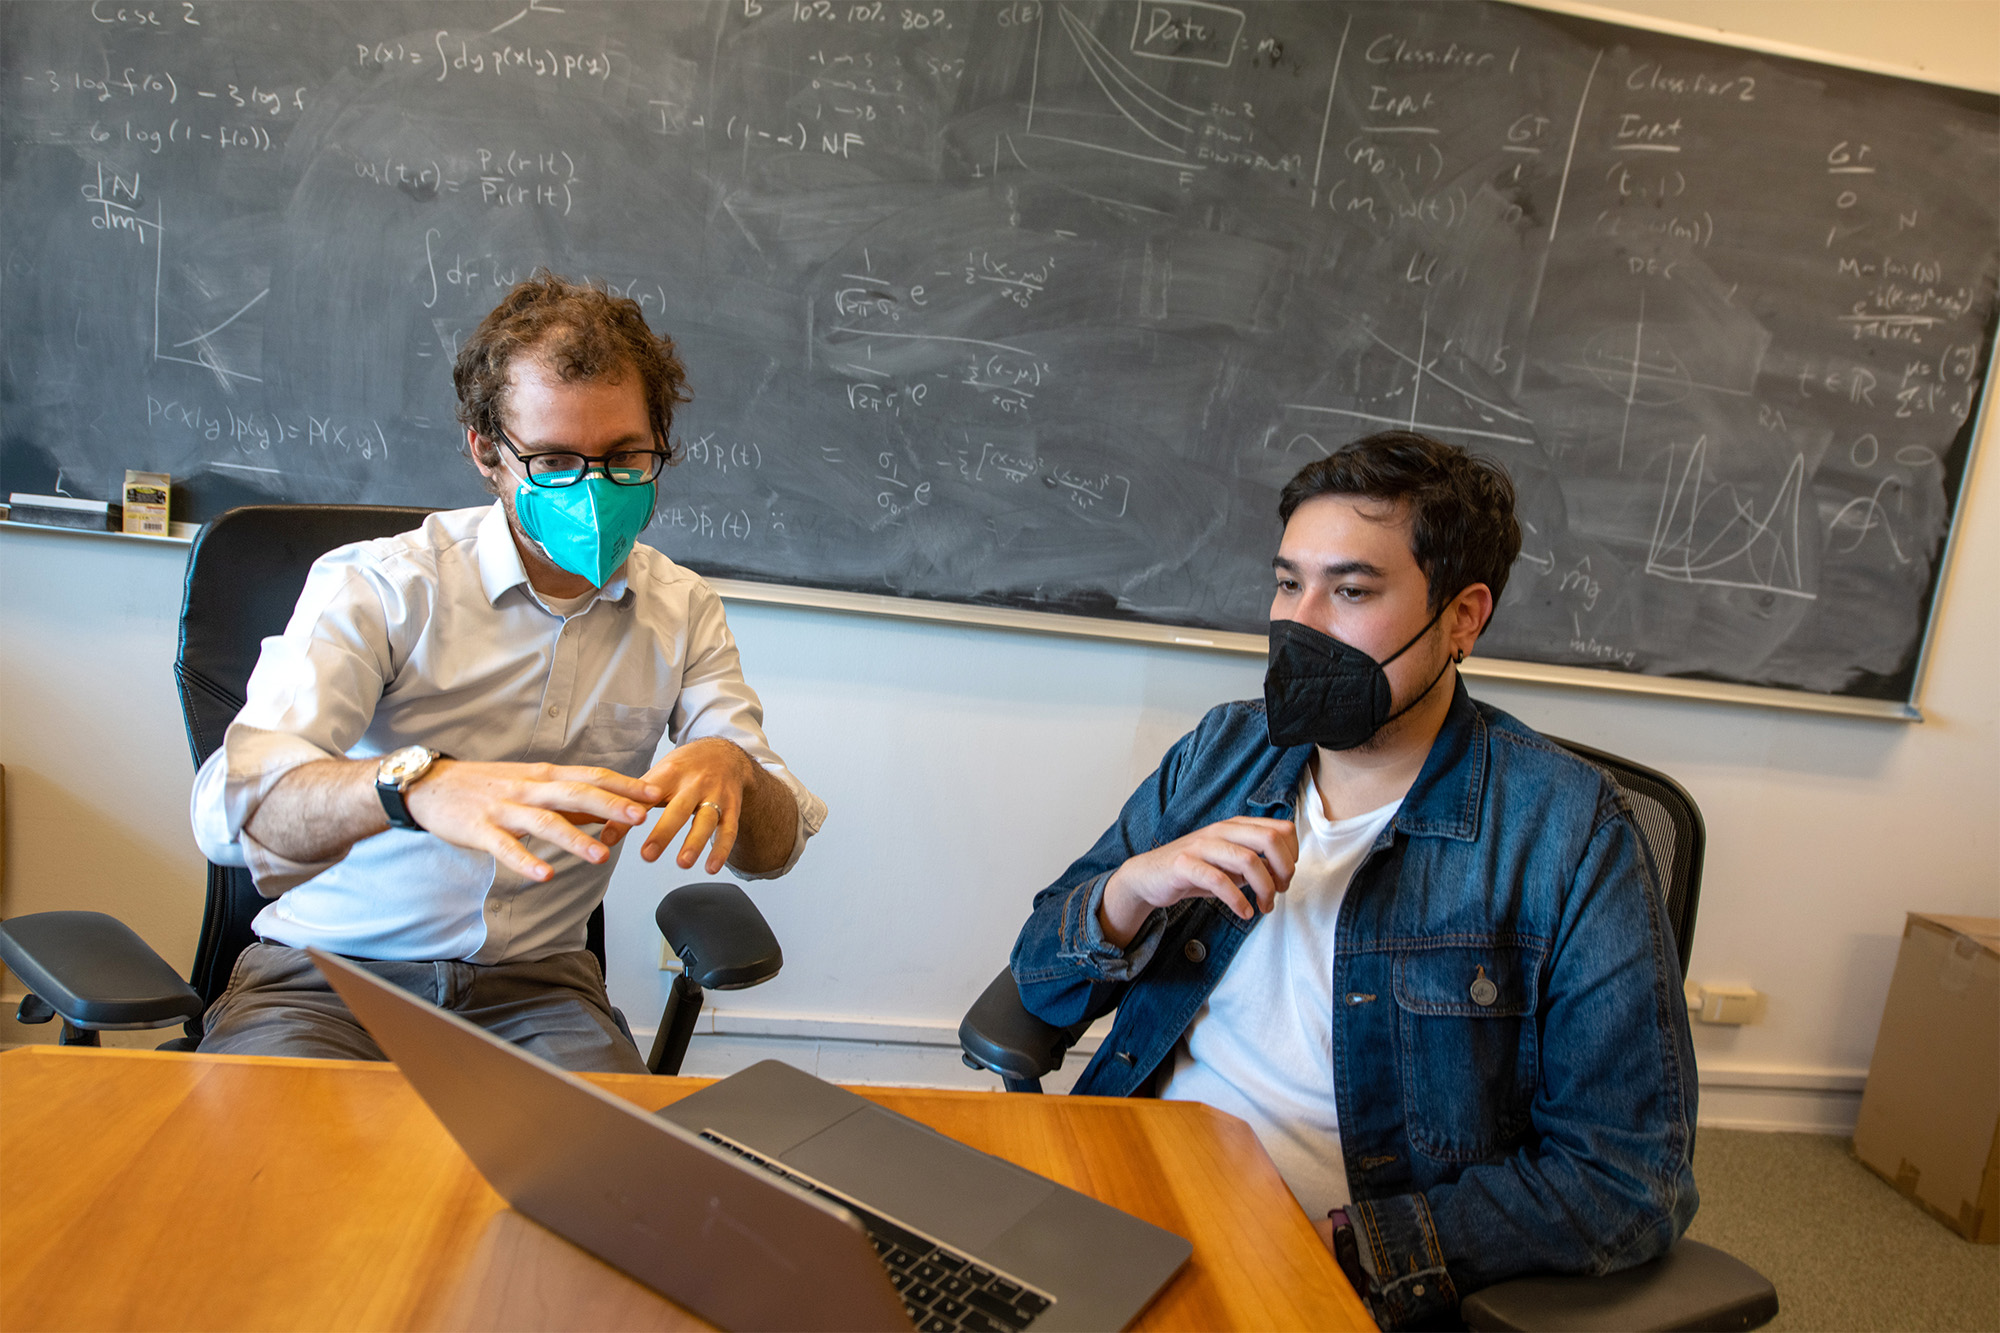 Two people wearing face masks in discussion while looking at a laptop. In the background is a chalkboard with calculations.